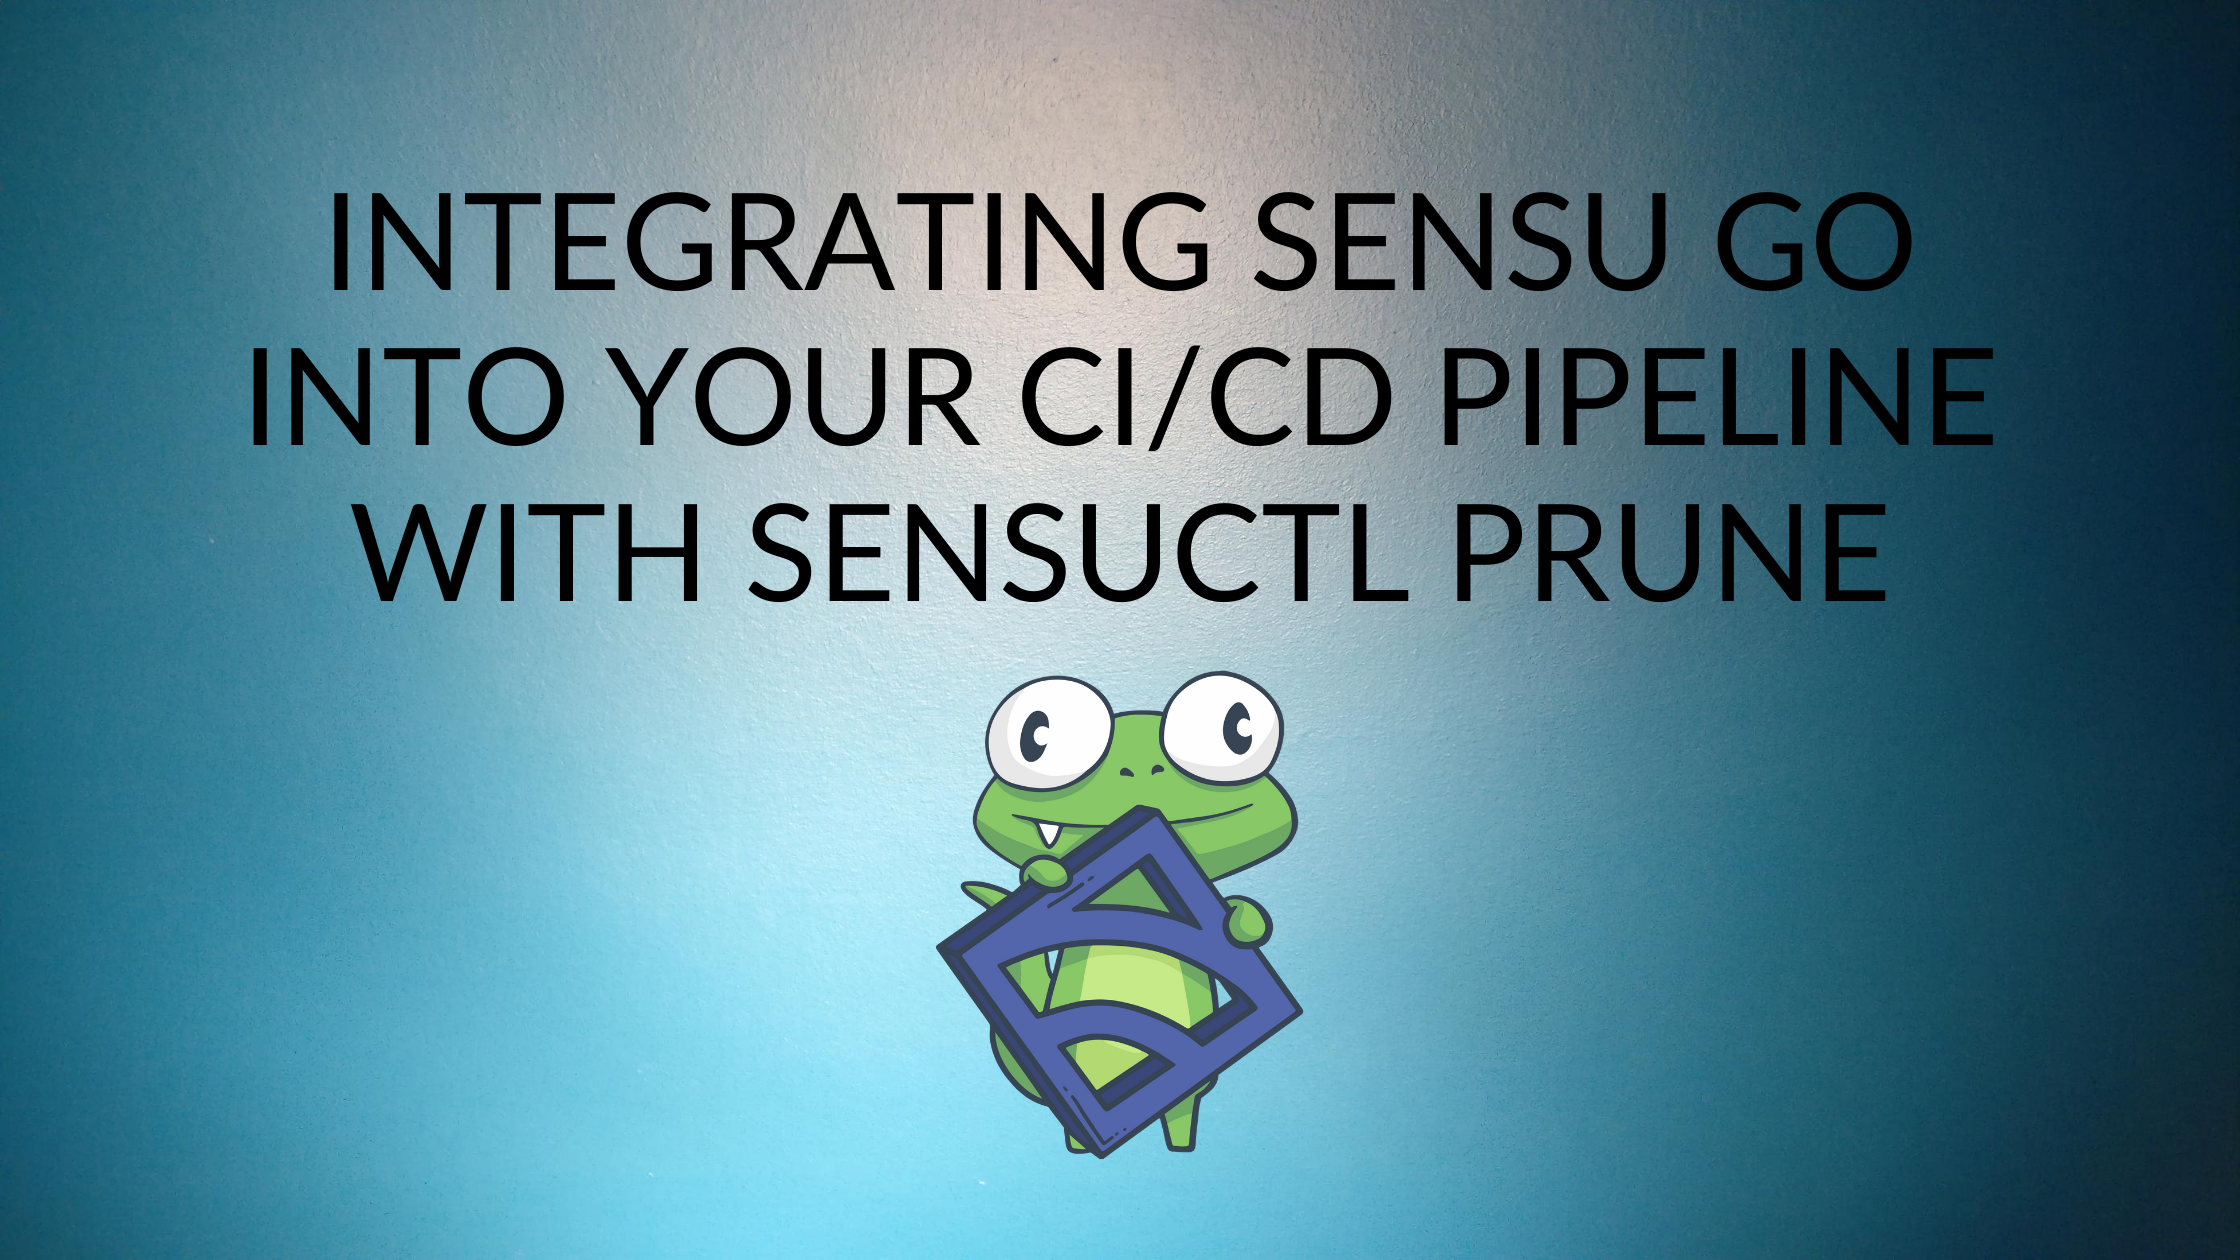 Integrating Sensu Go into your CI/CD pipeline with sensuctl prune